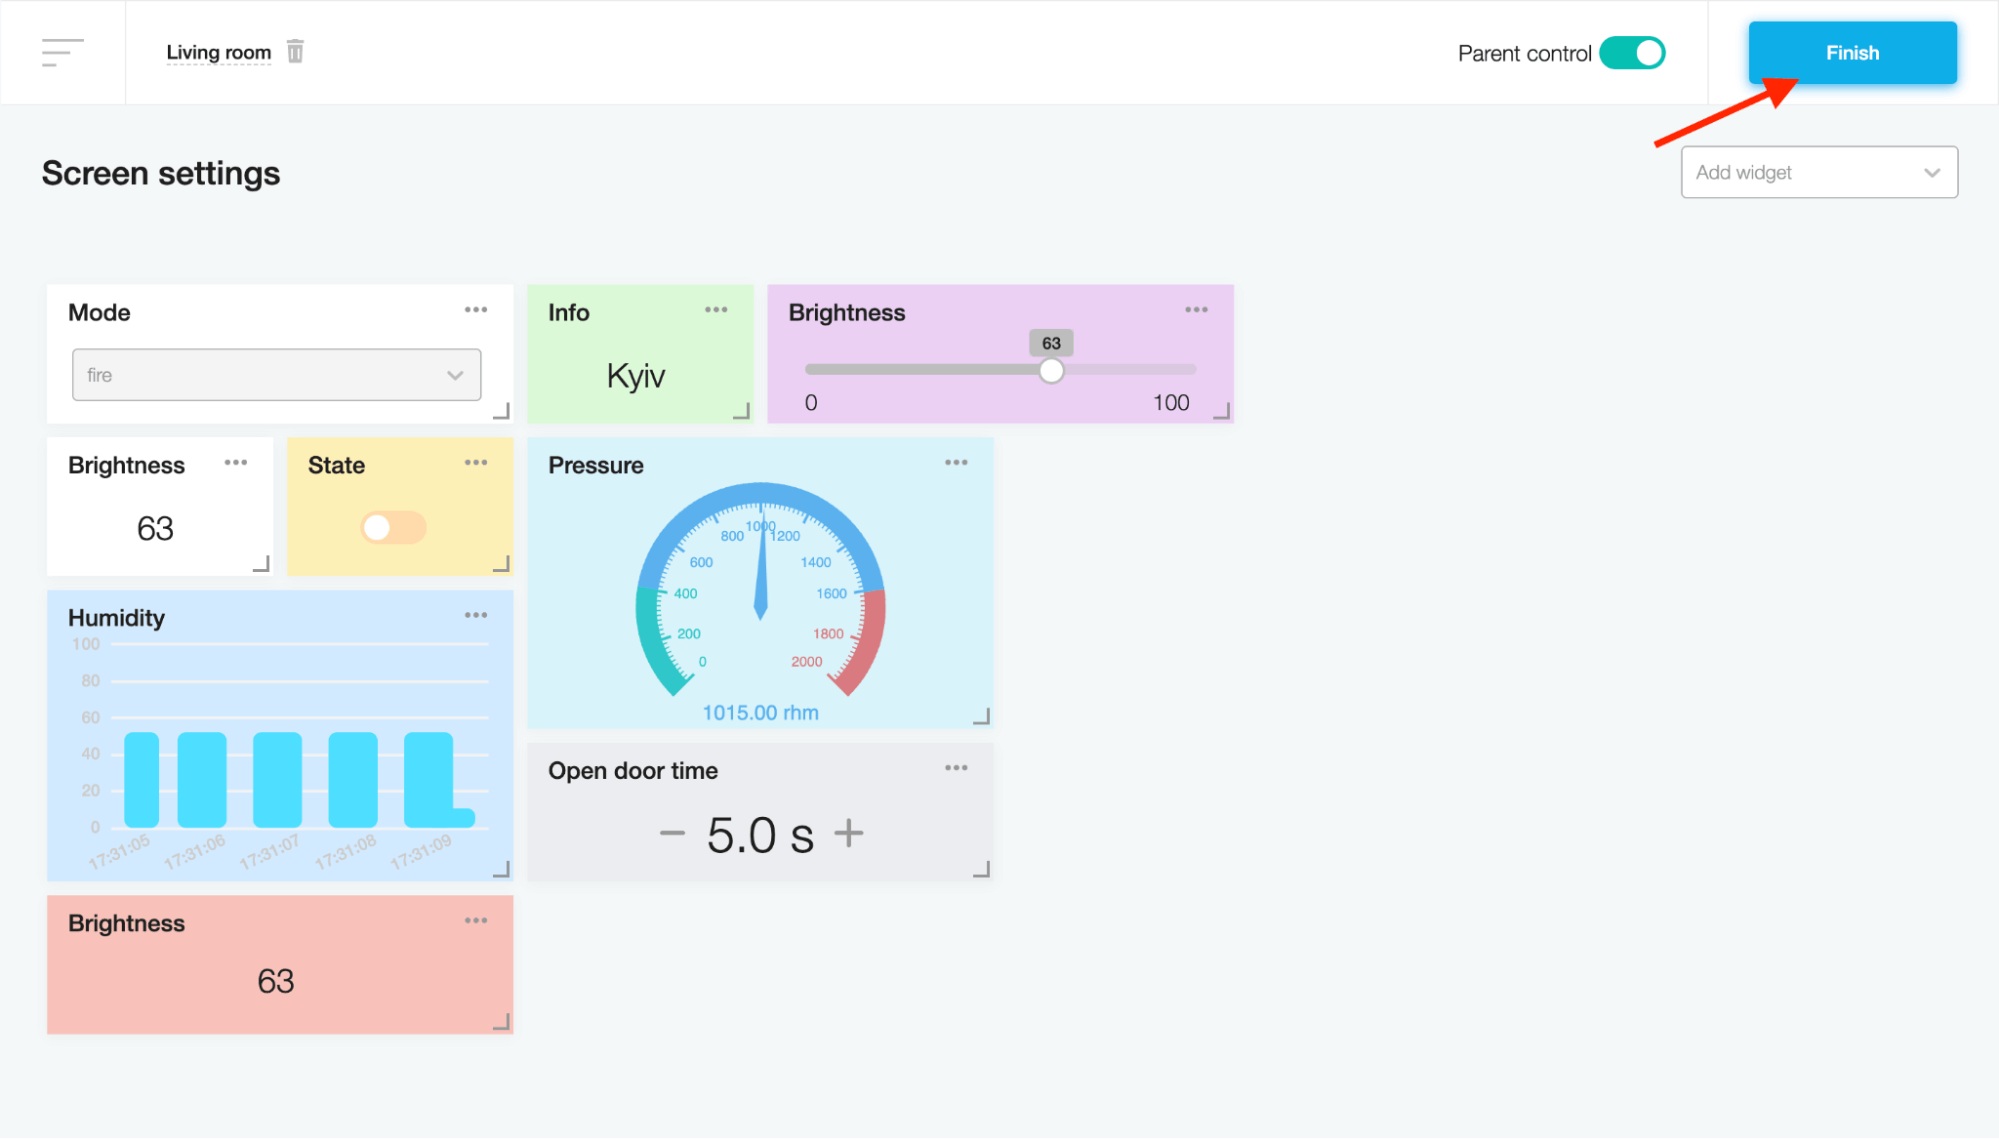 Adding the Thermostat widget to the screen